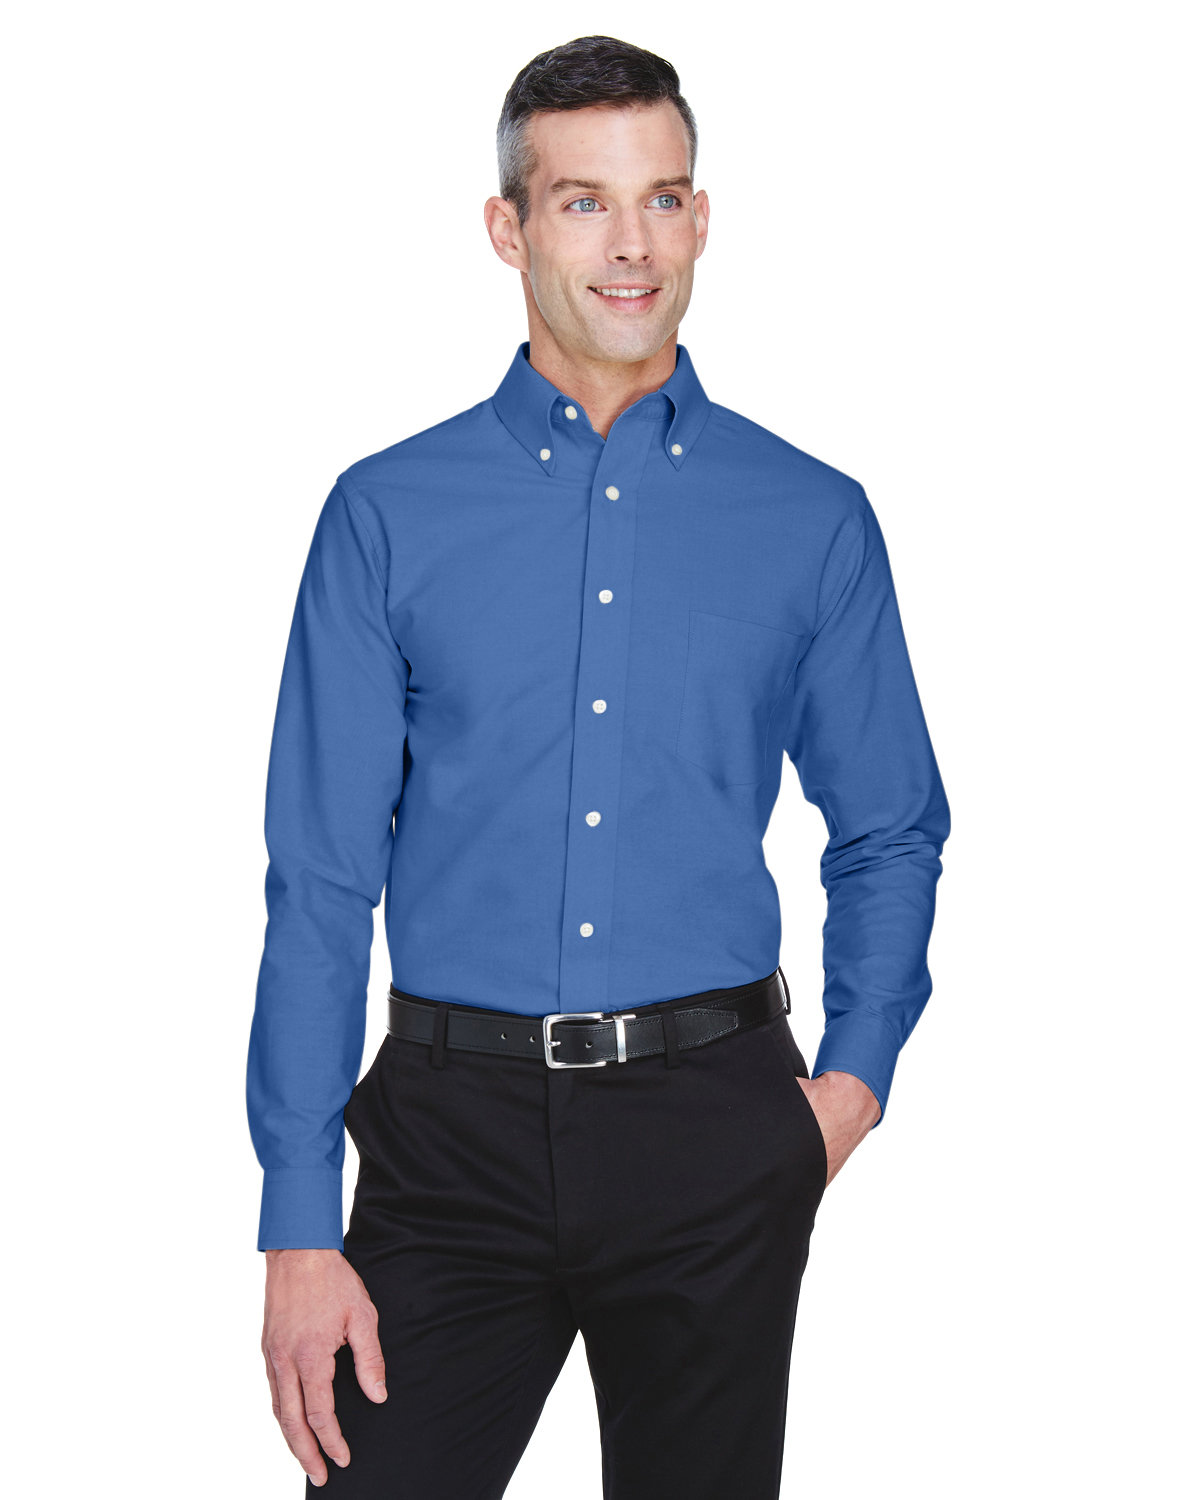 UltraClub Men's Classic Wrinkle-Resistant Long-Sleeve Oxford FRENCH BLUE 